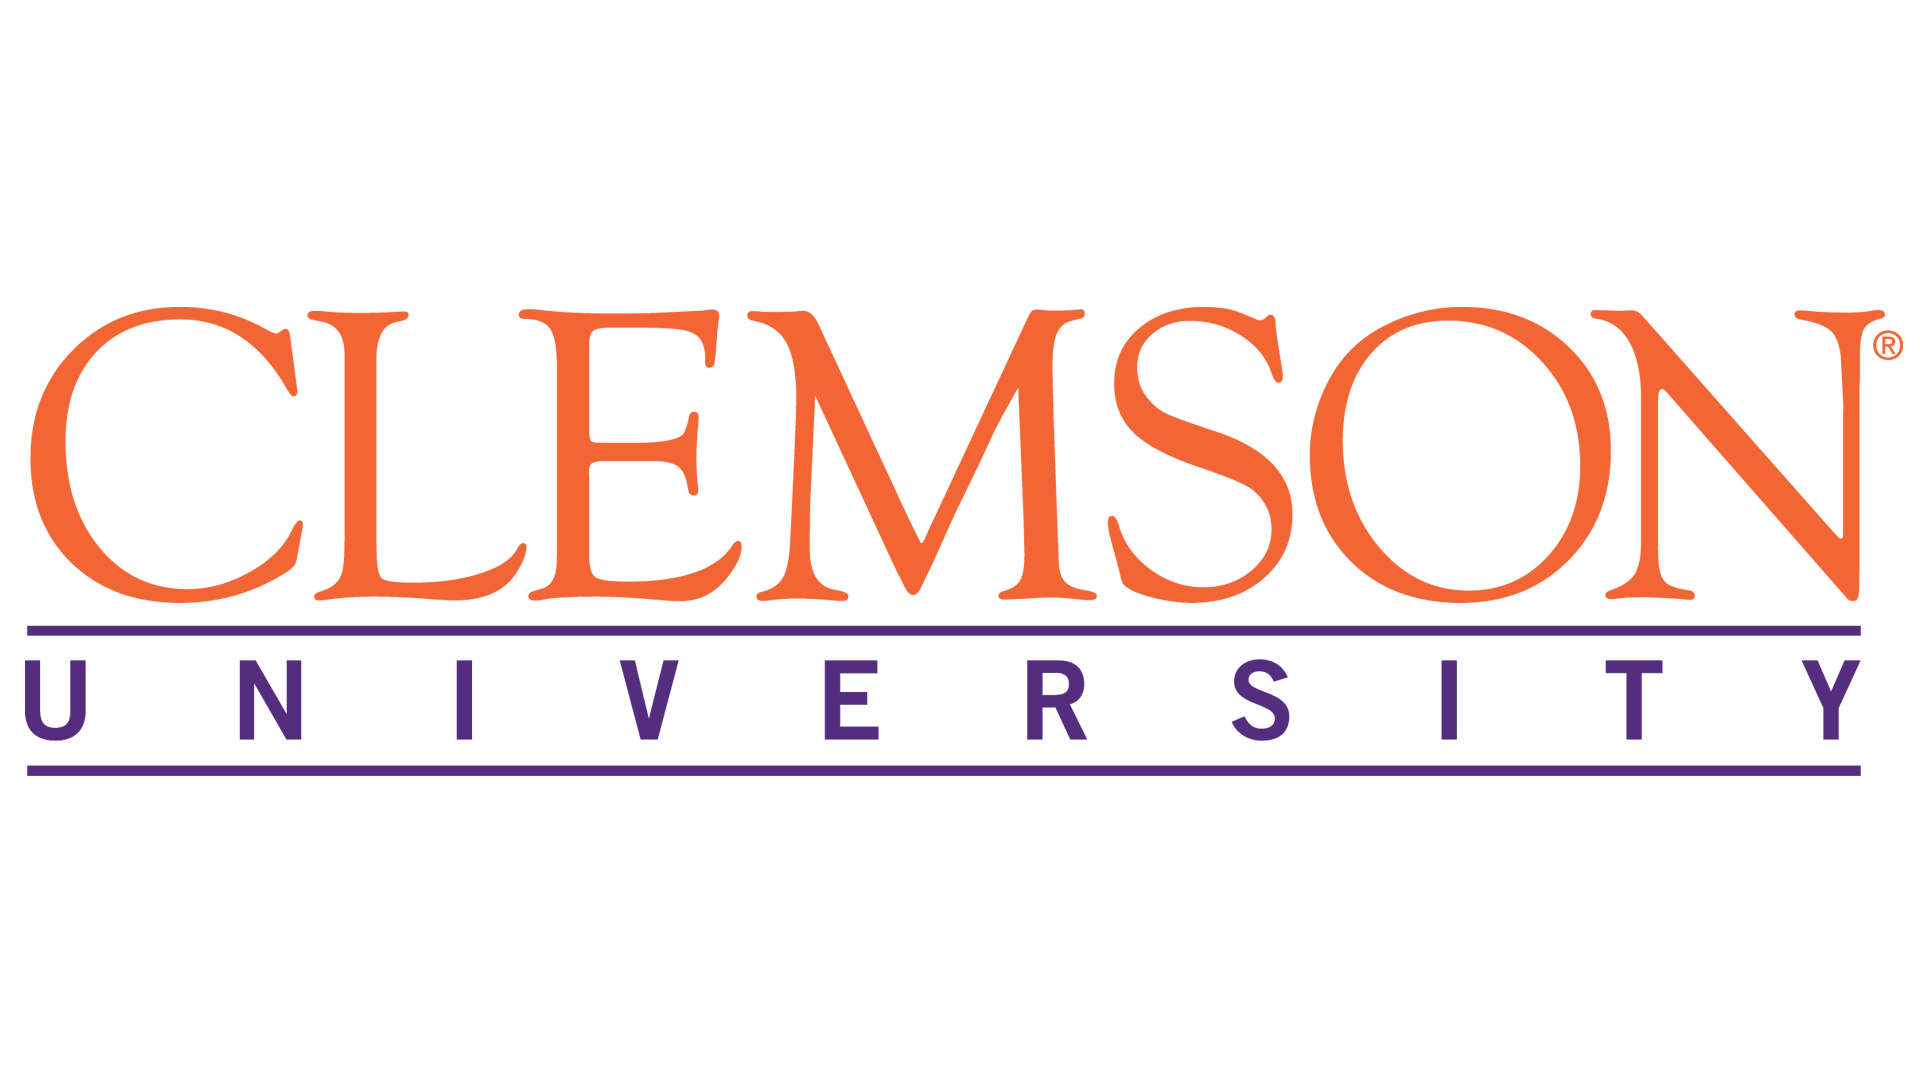 Clemson Logo - Clemson University Logo, Clemson University Symbol, Meaning, History